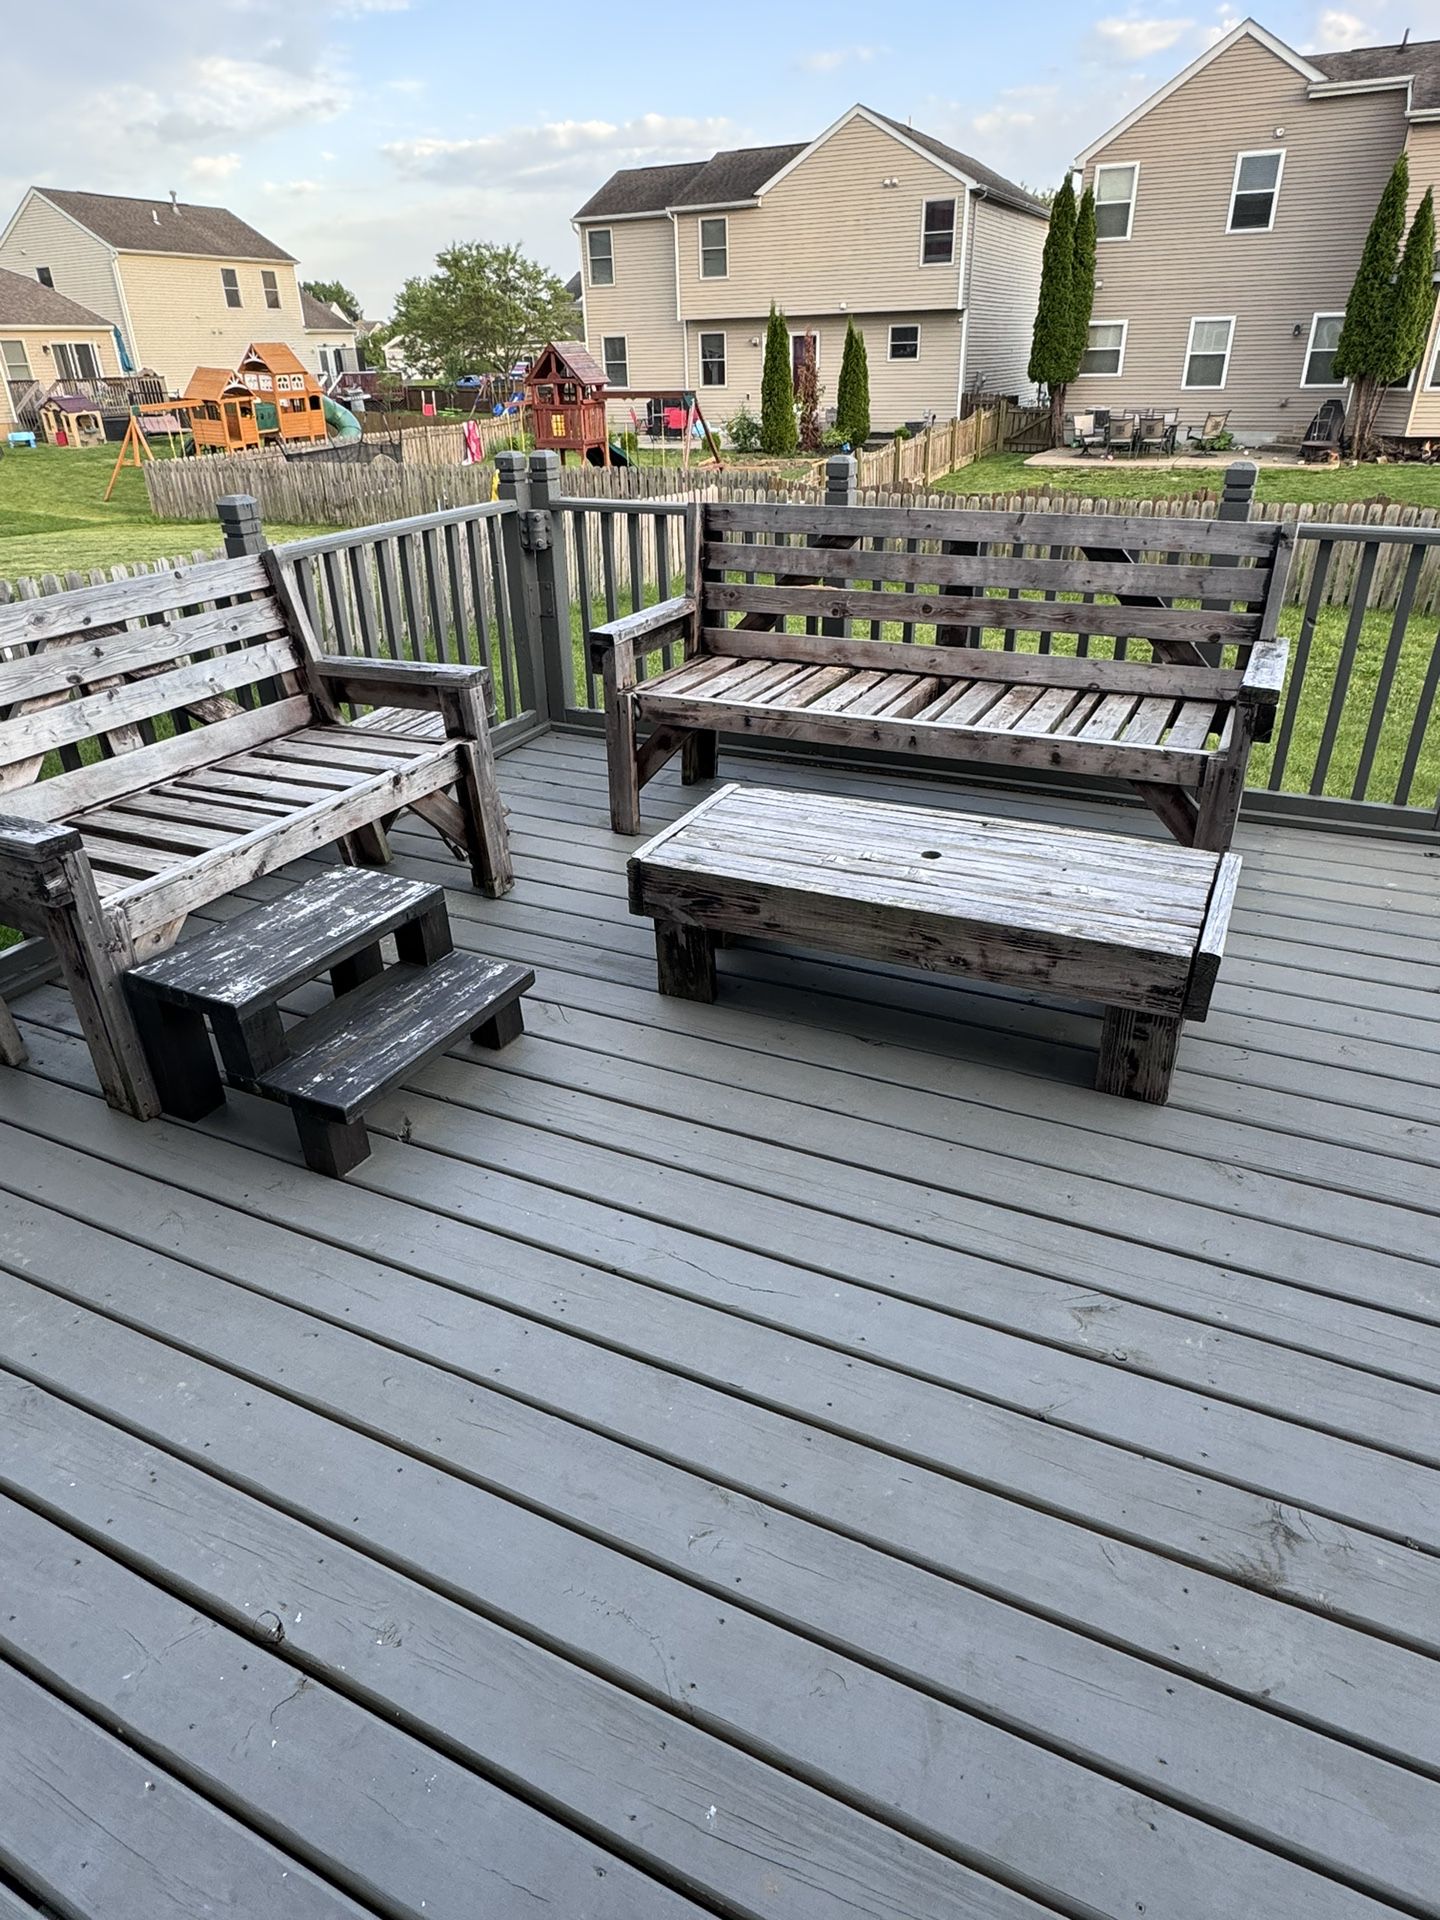 Wooden Patio Furniture 